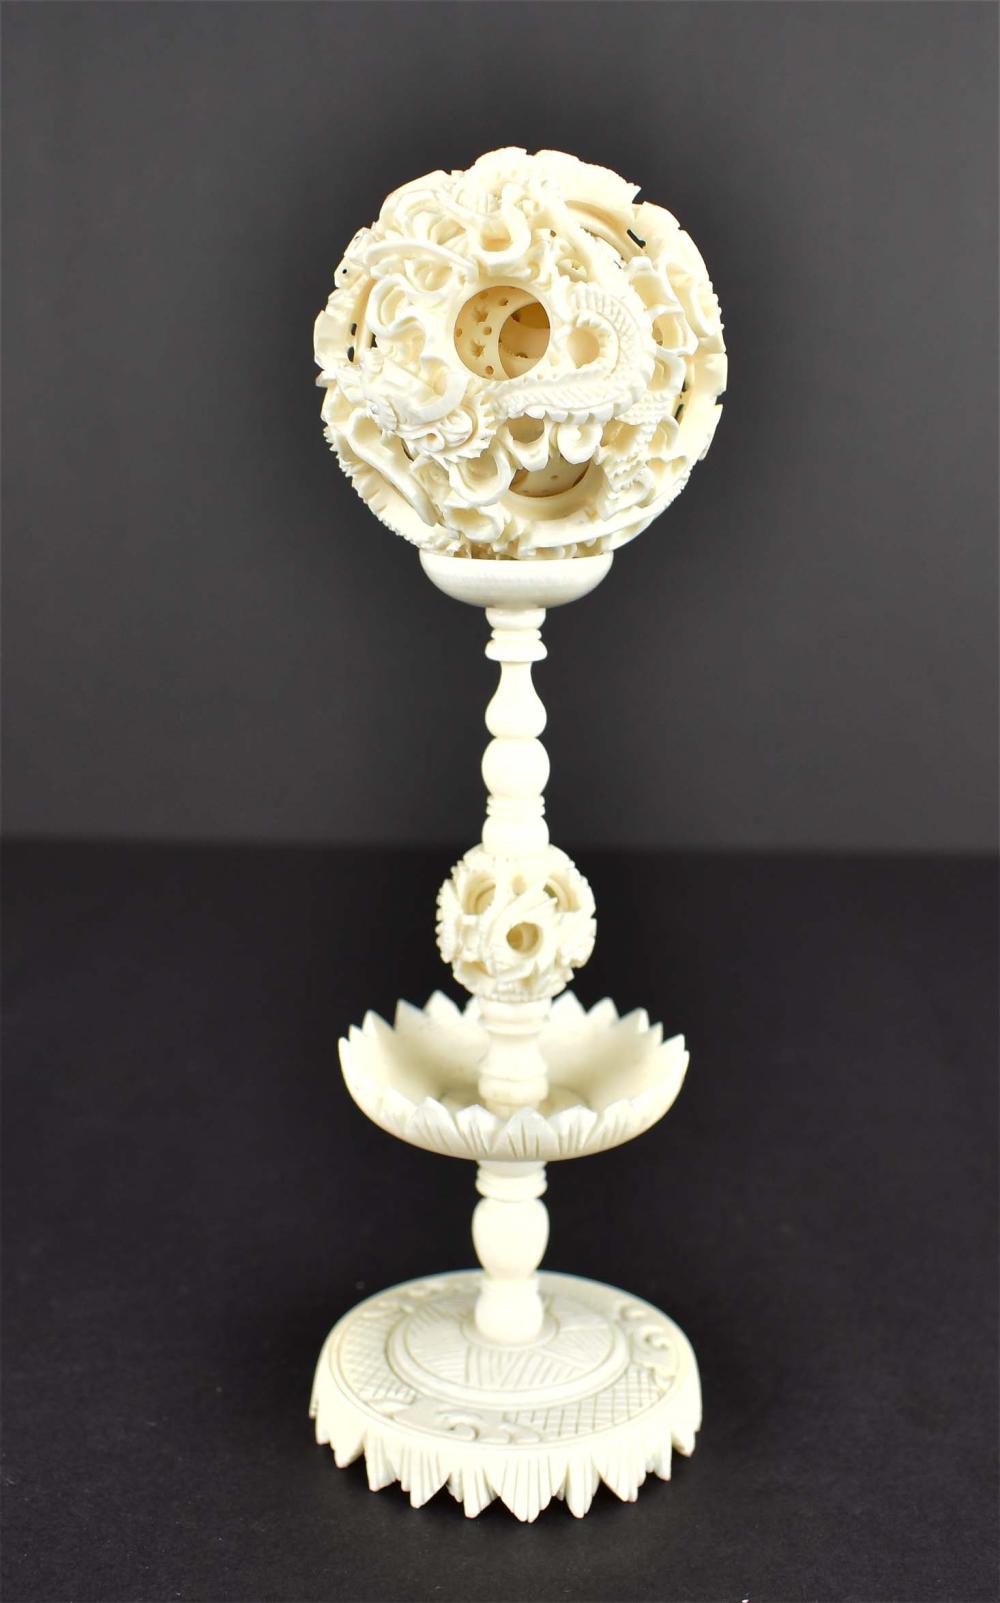 CHINESE CARVED PUZZLE BALL ON STANDCarved